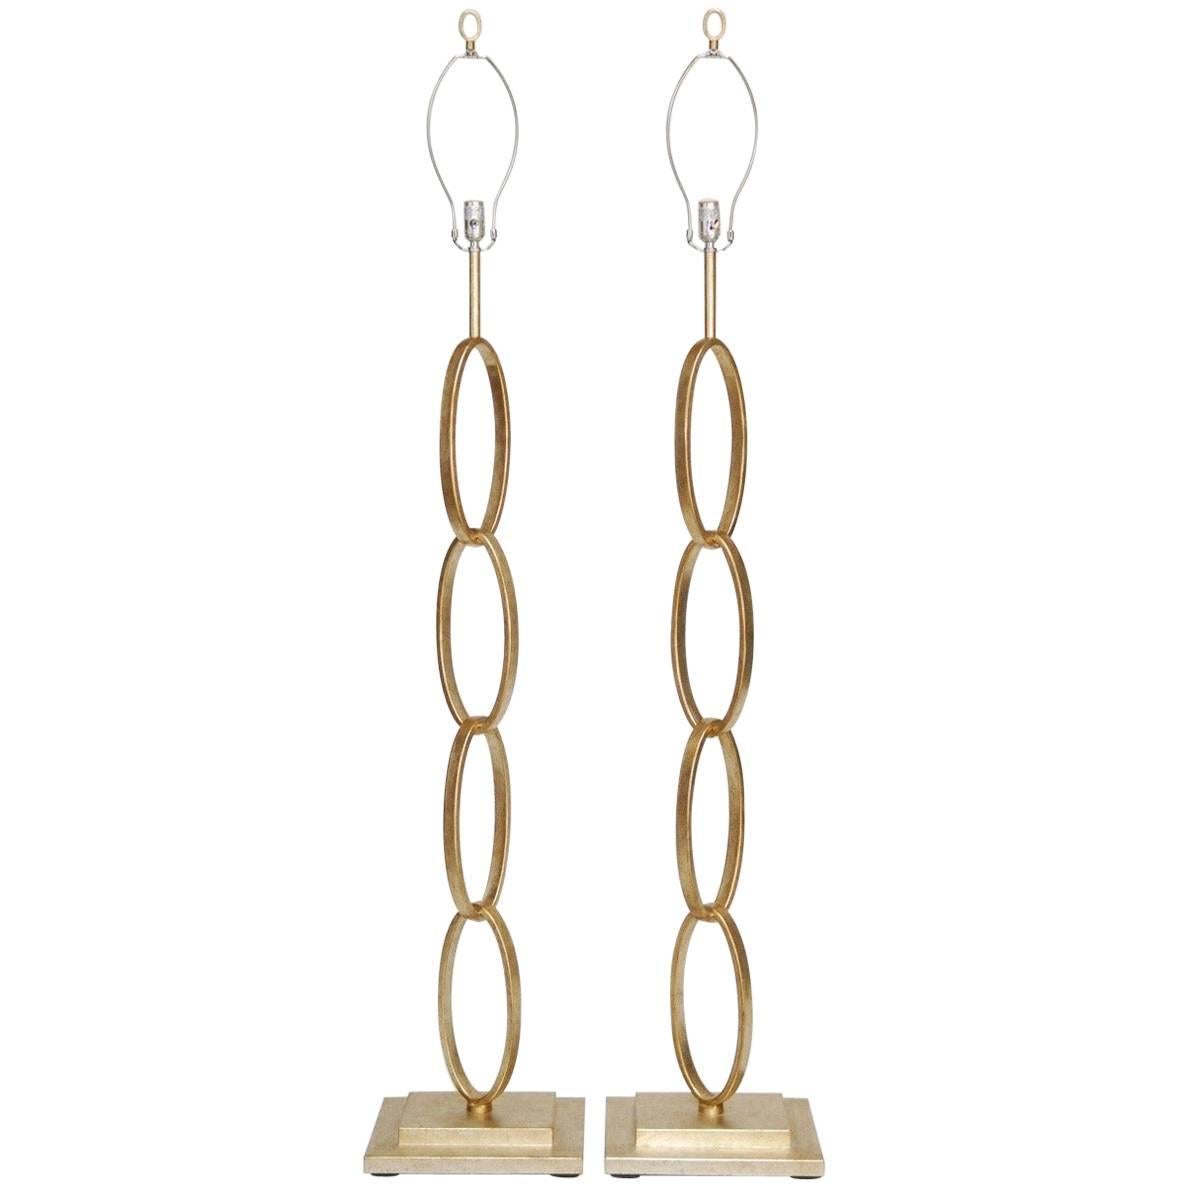 Pair of Silver Leaf Chain Link Floor Lamps by Currey